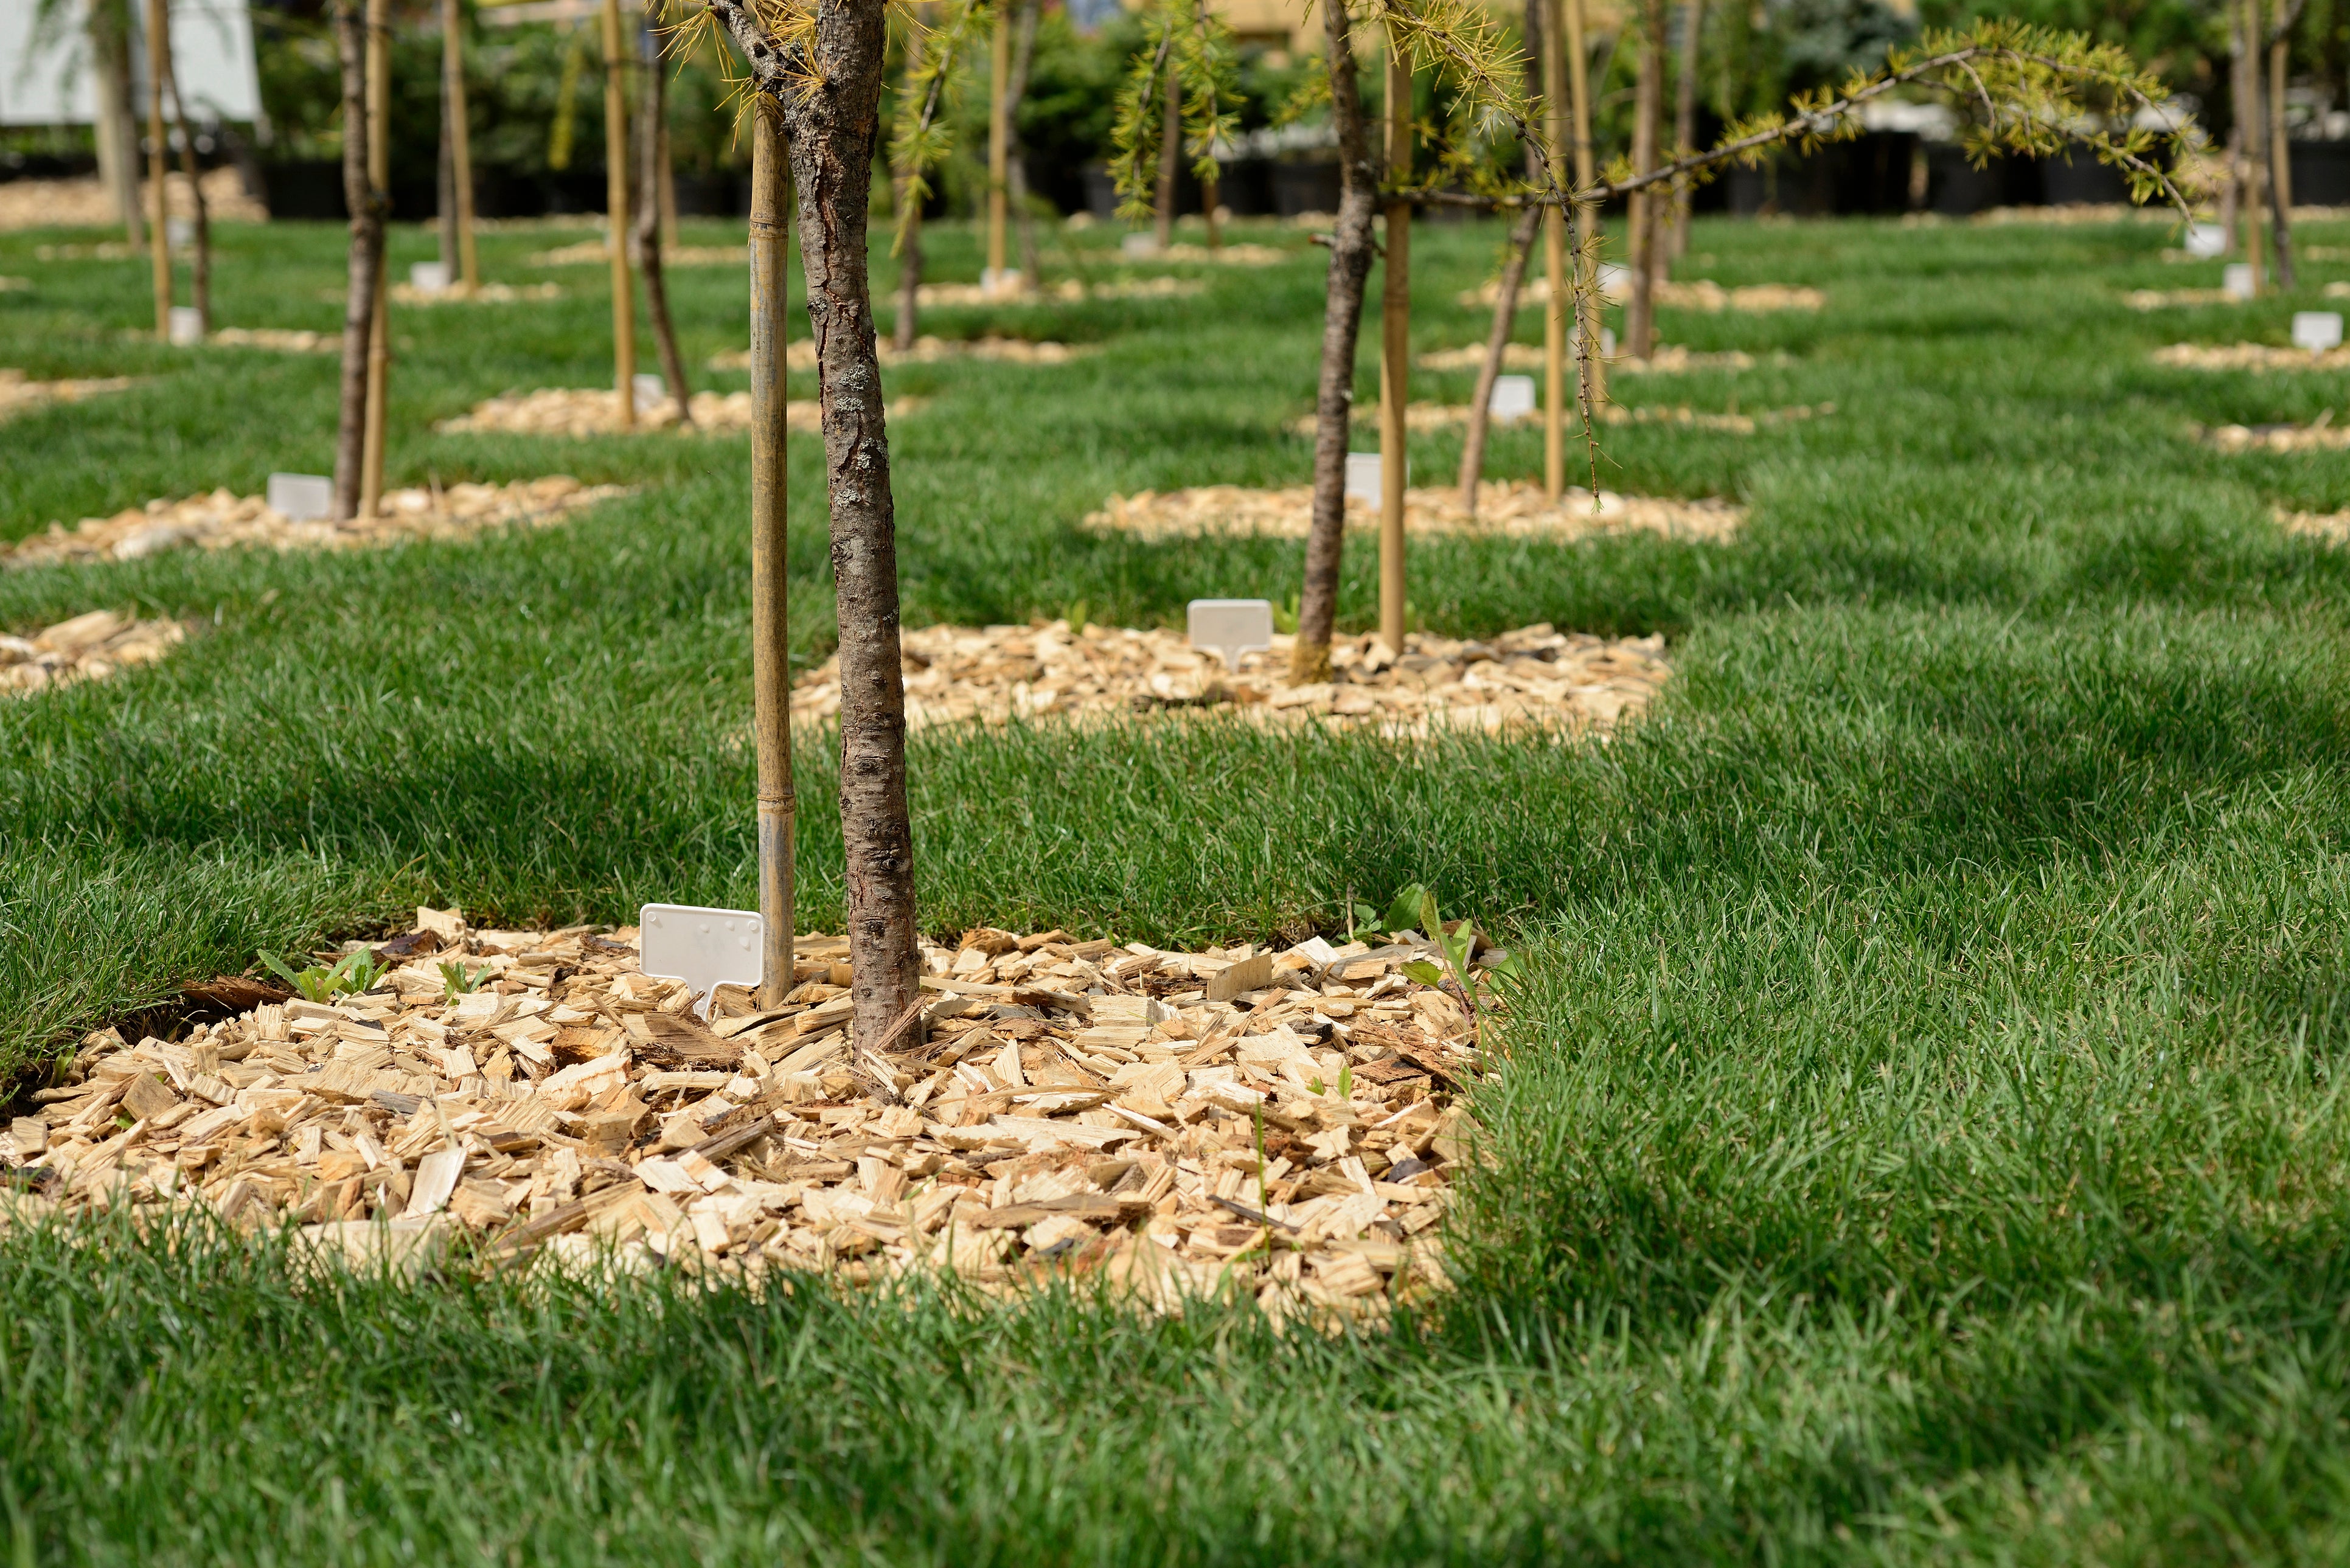 Tree planting can help to remove CO2 from the atmosphere